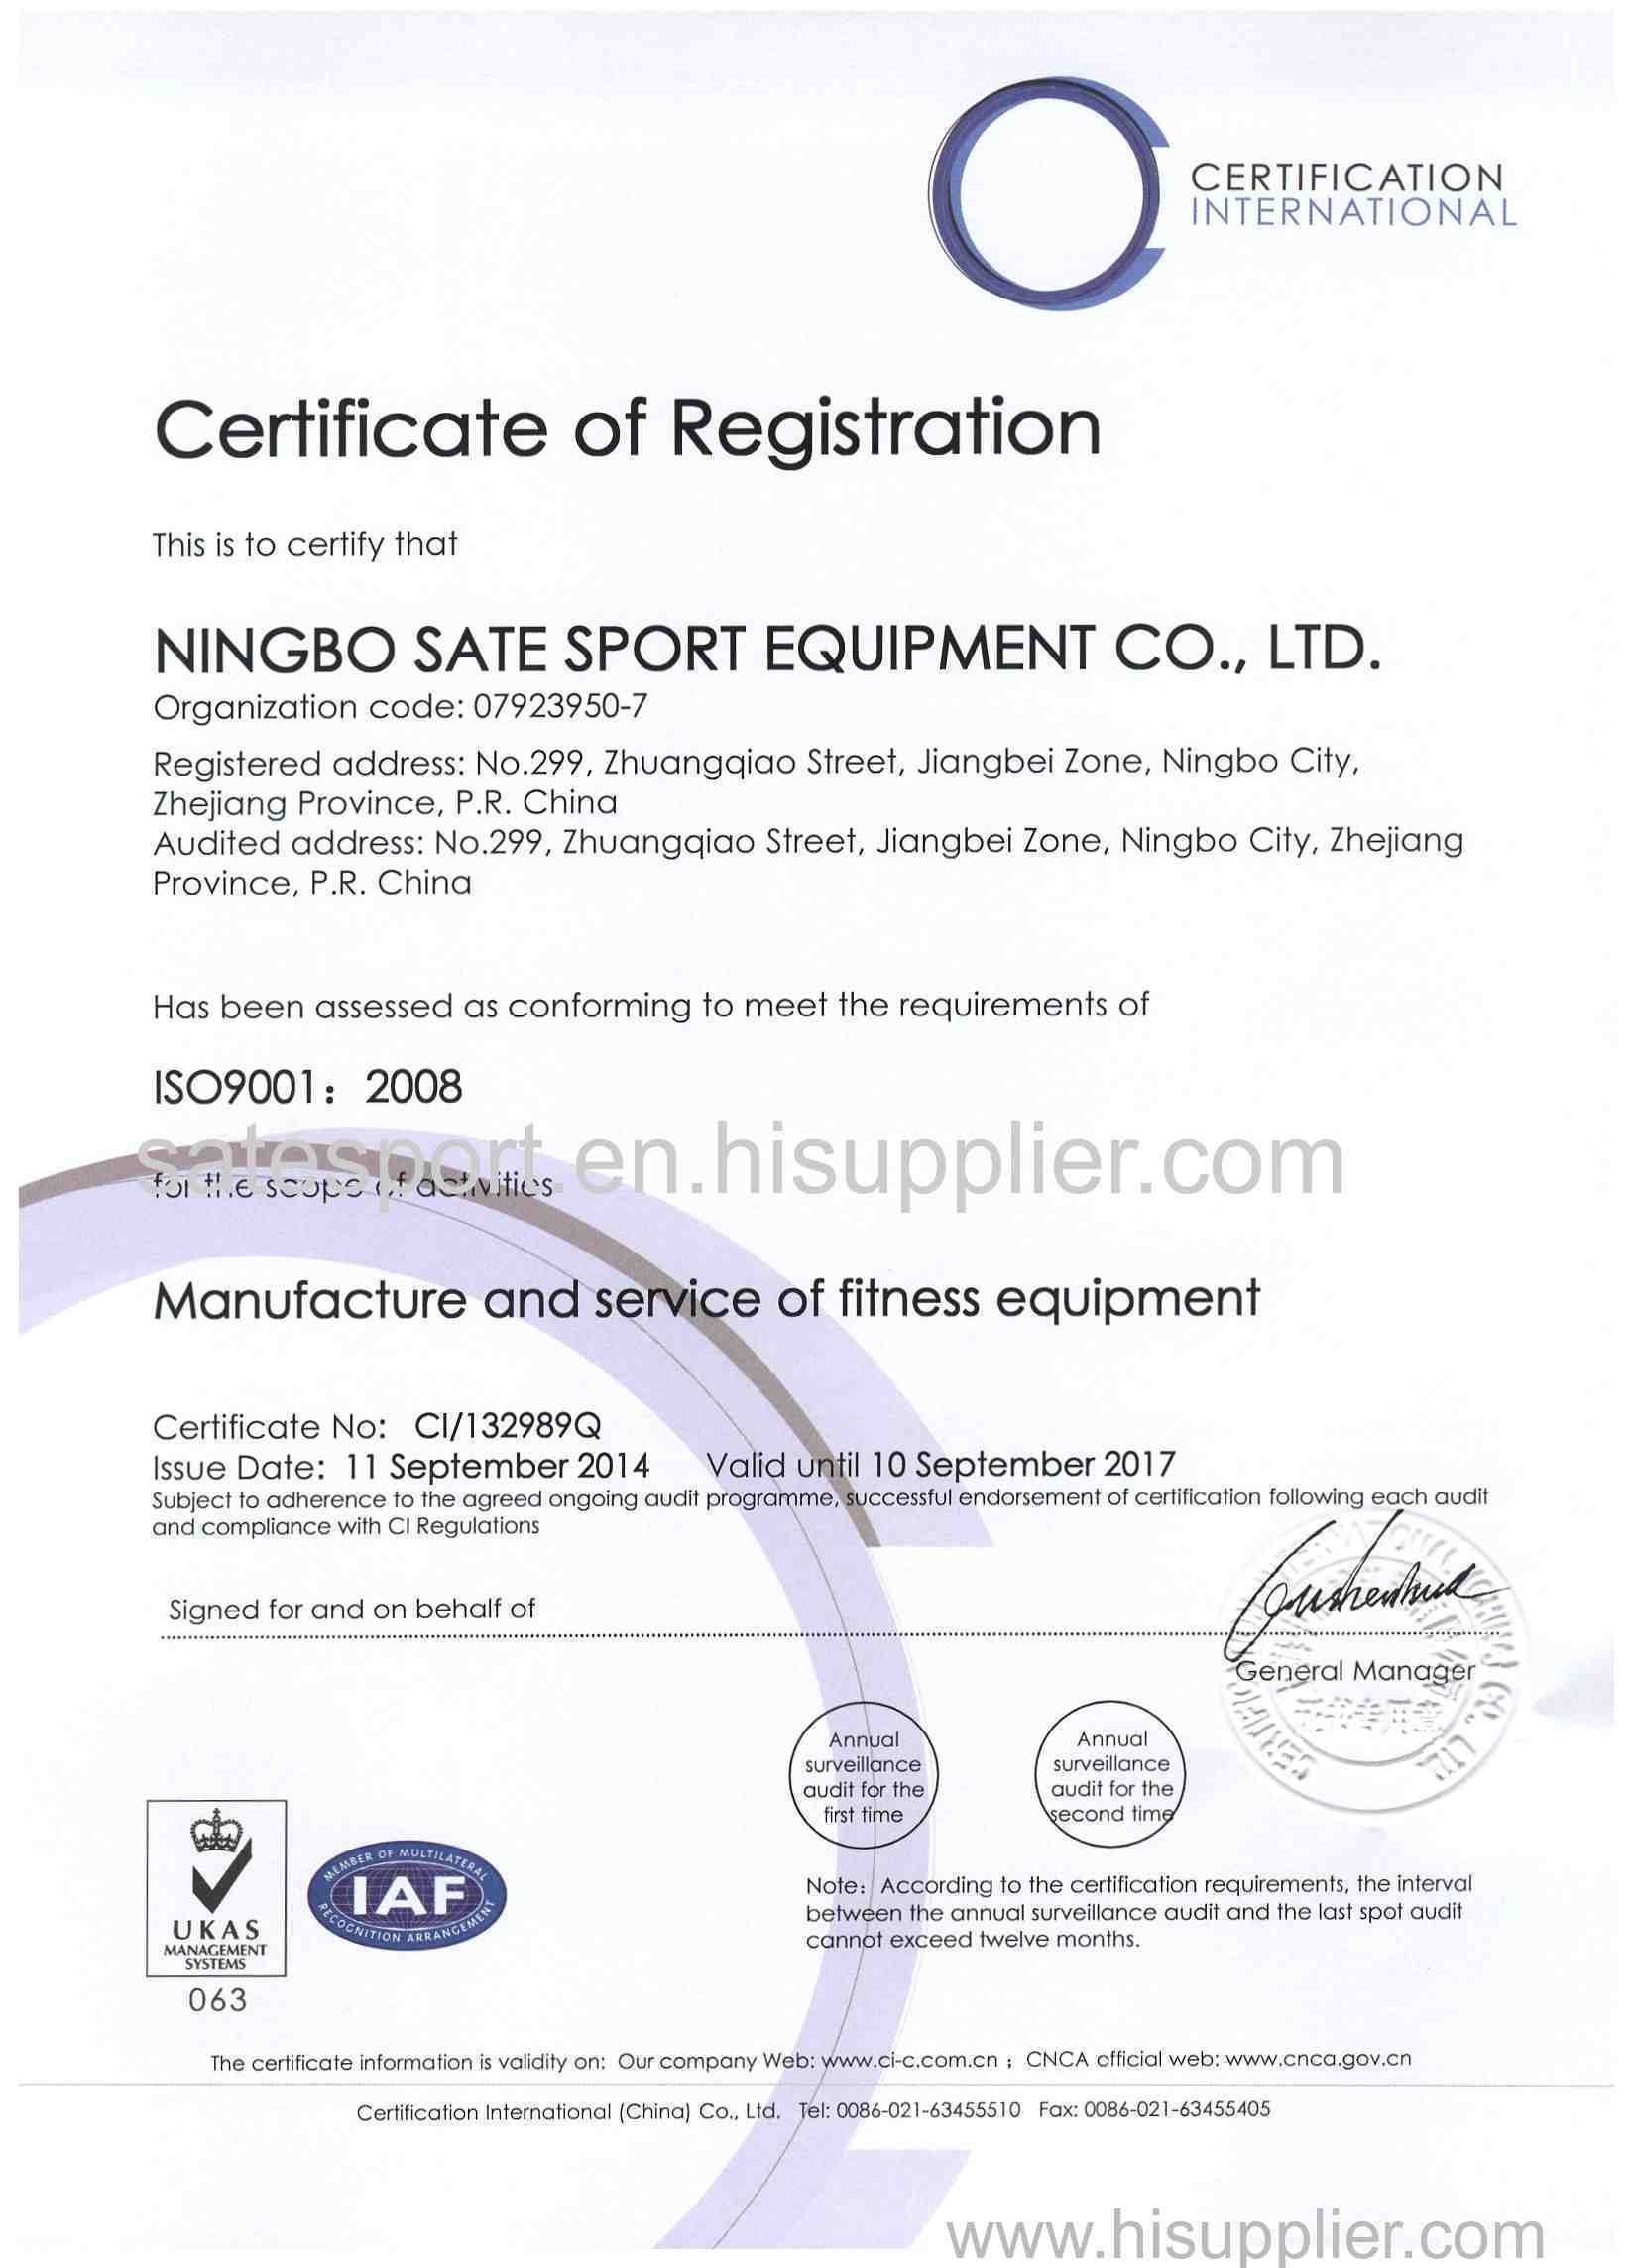 Our company passed the ISO9001:2008 quality management system certification